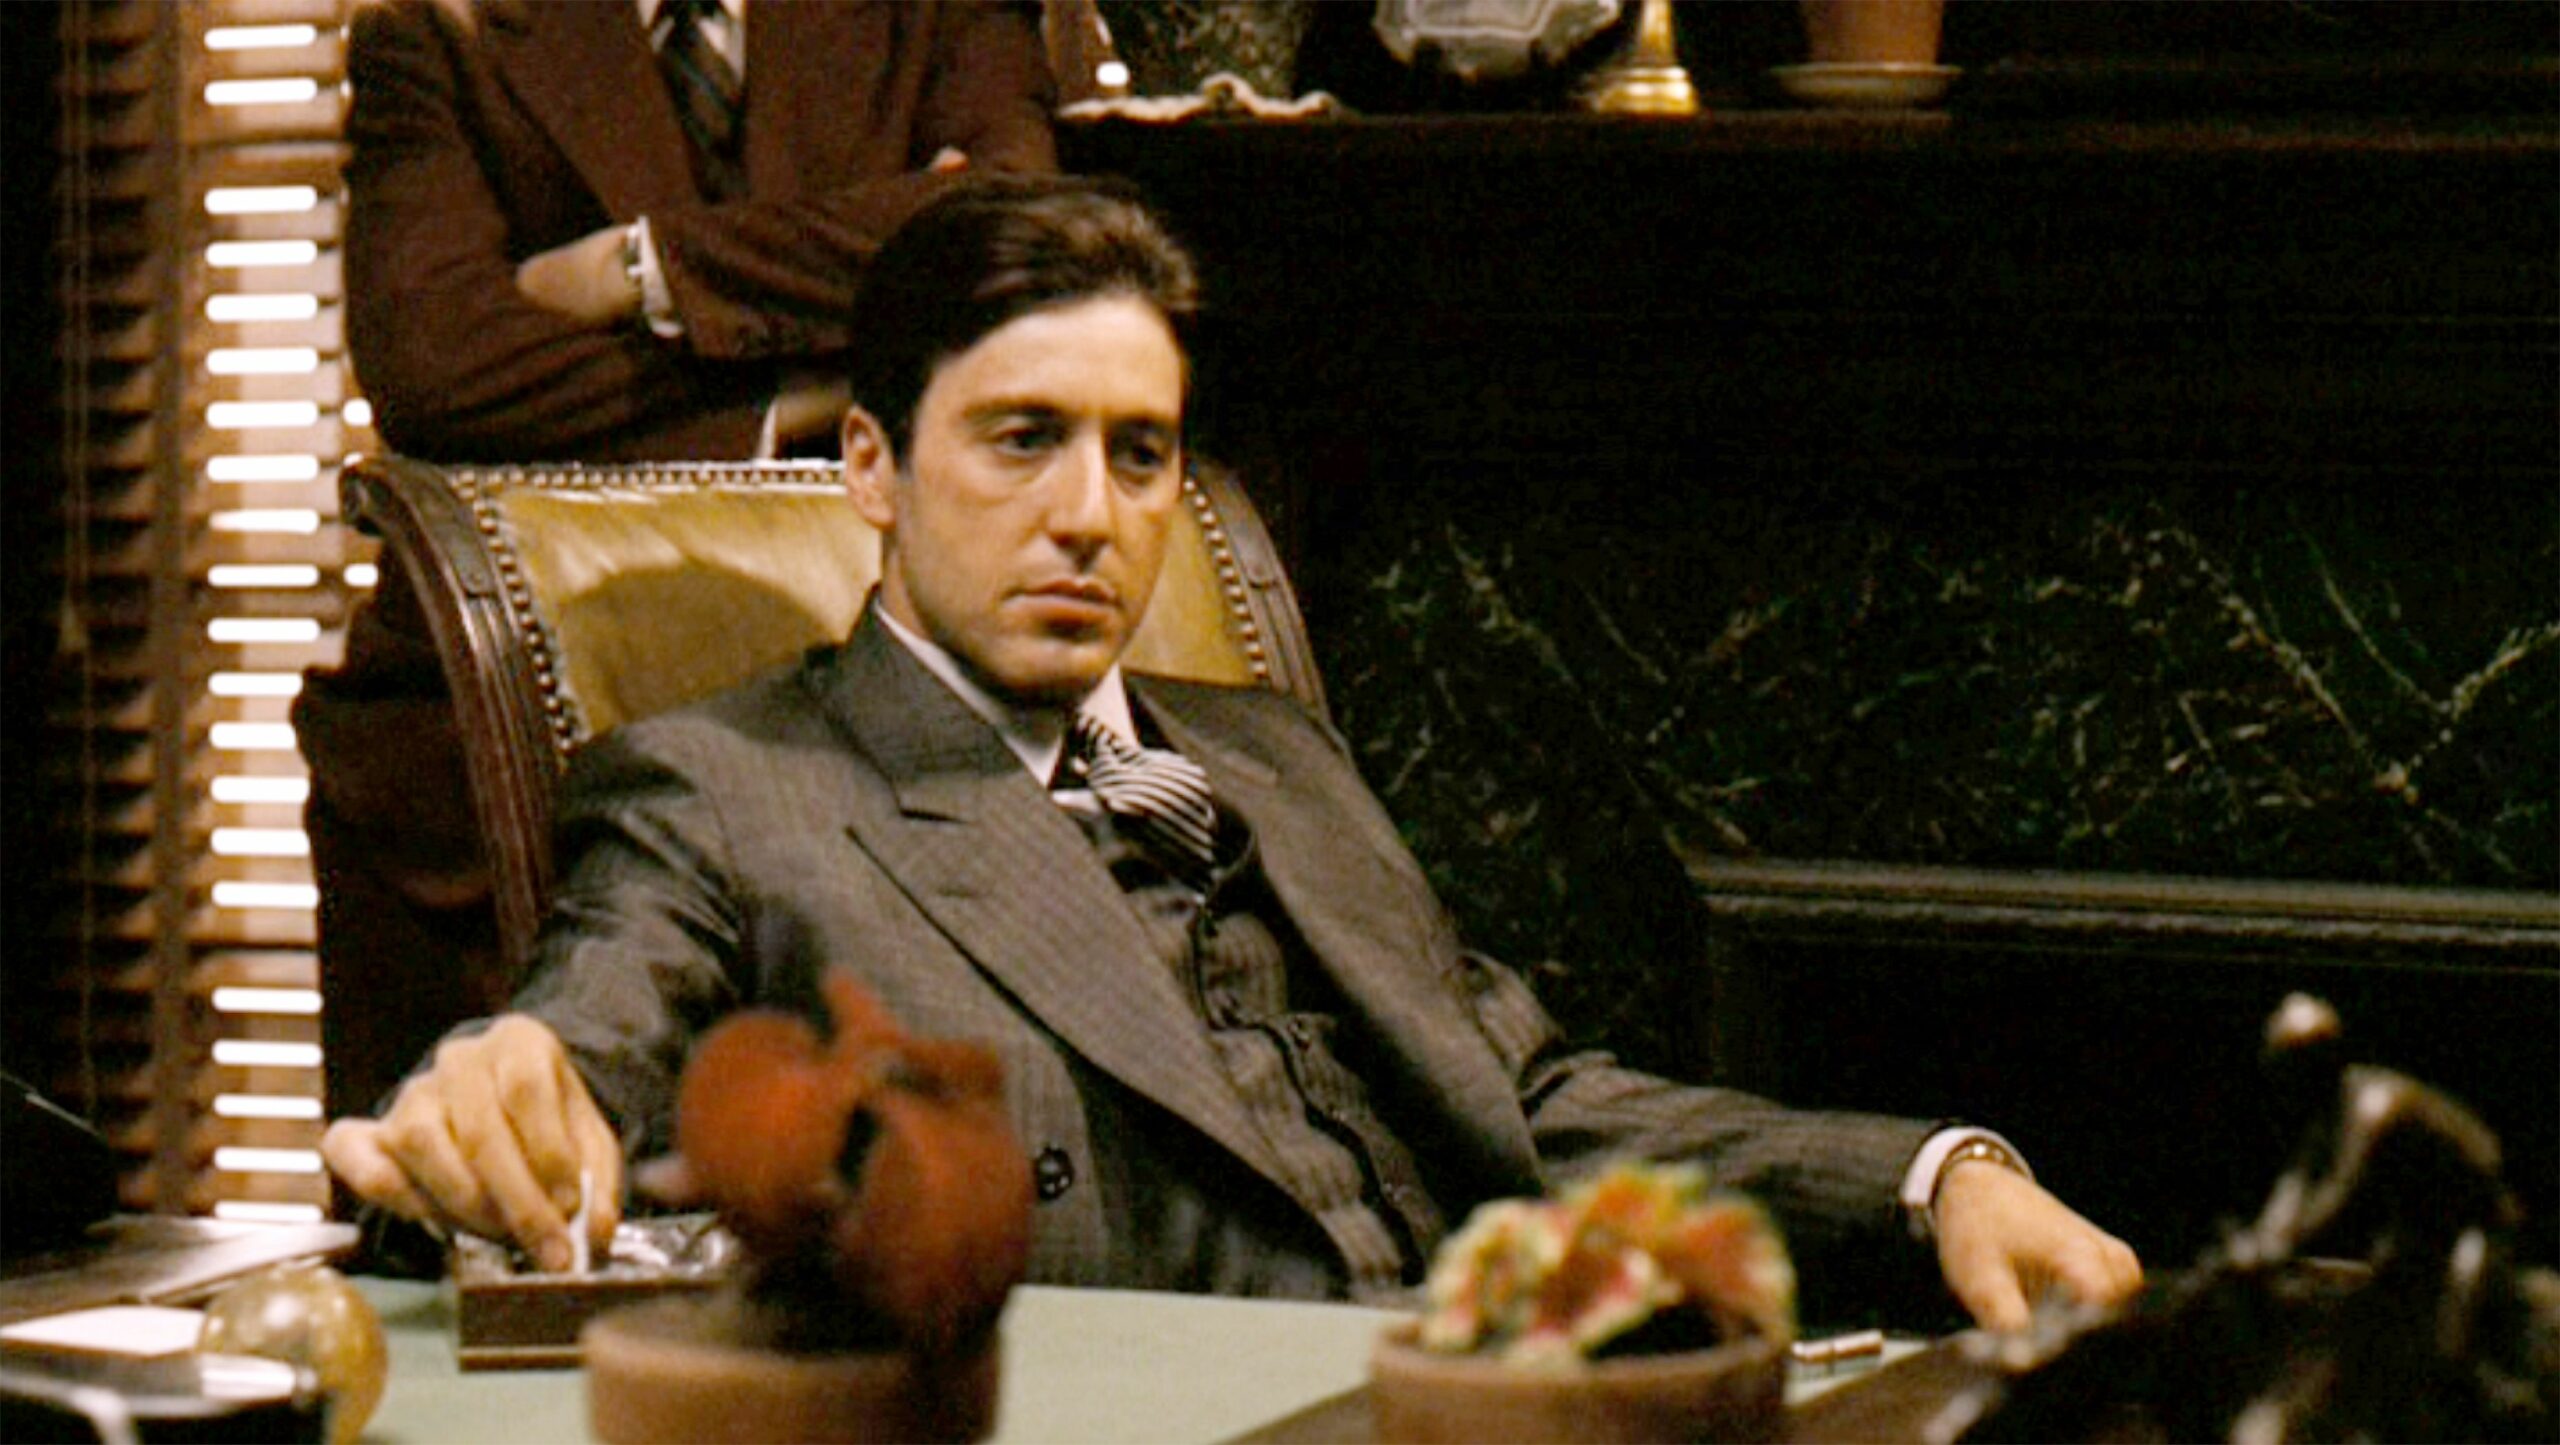 How Marlon Brando Fought for Al Pacino's Breakout Role in 'The Godfather'—A Behind-the-Scenes Look